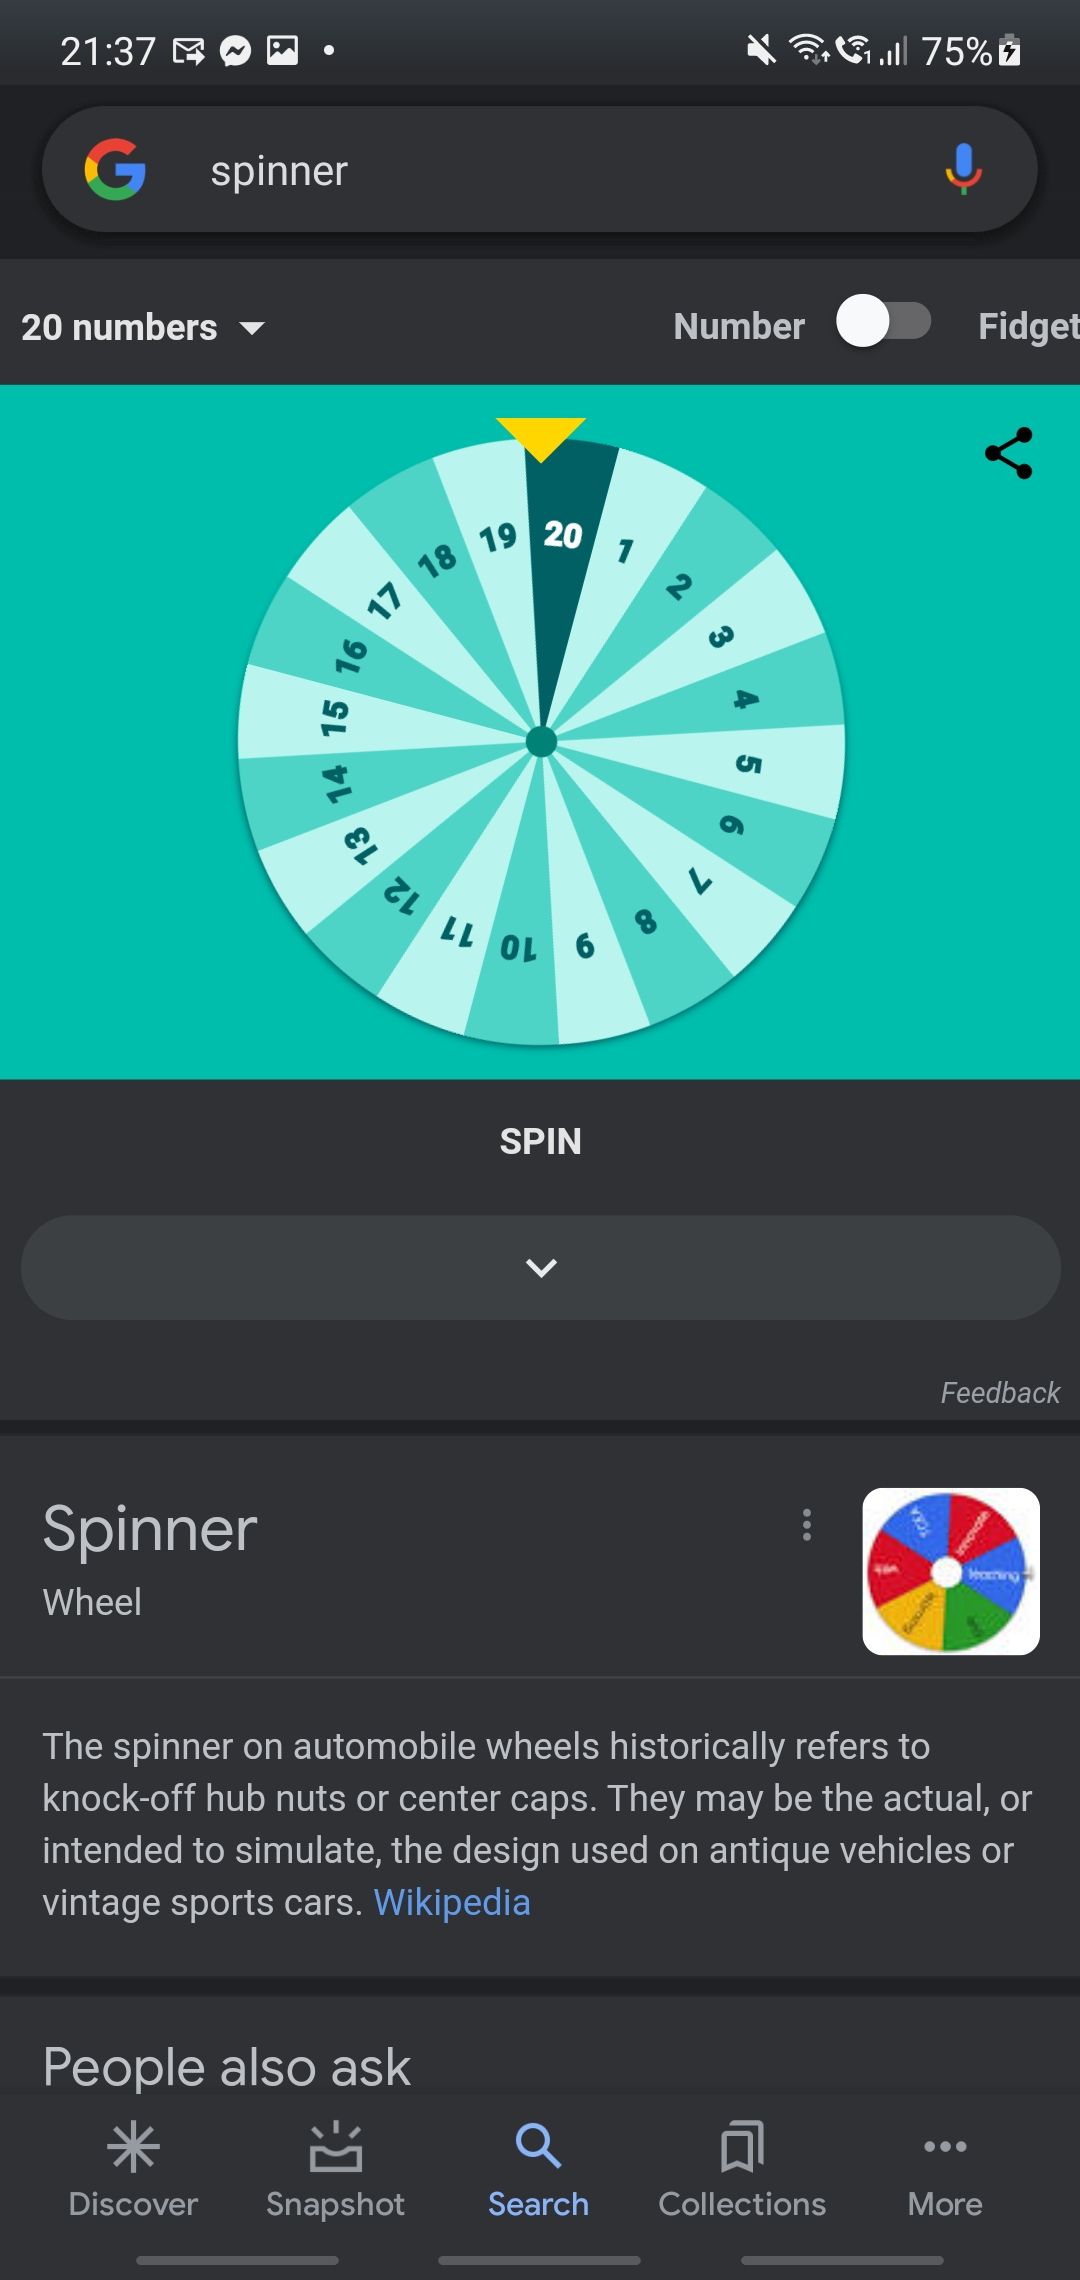 Number spinner with 20 results